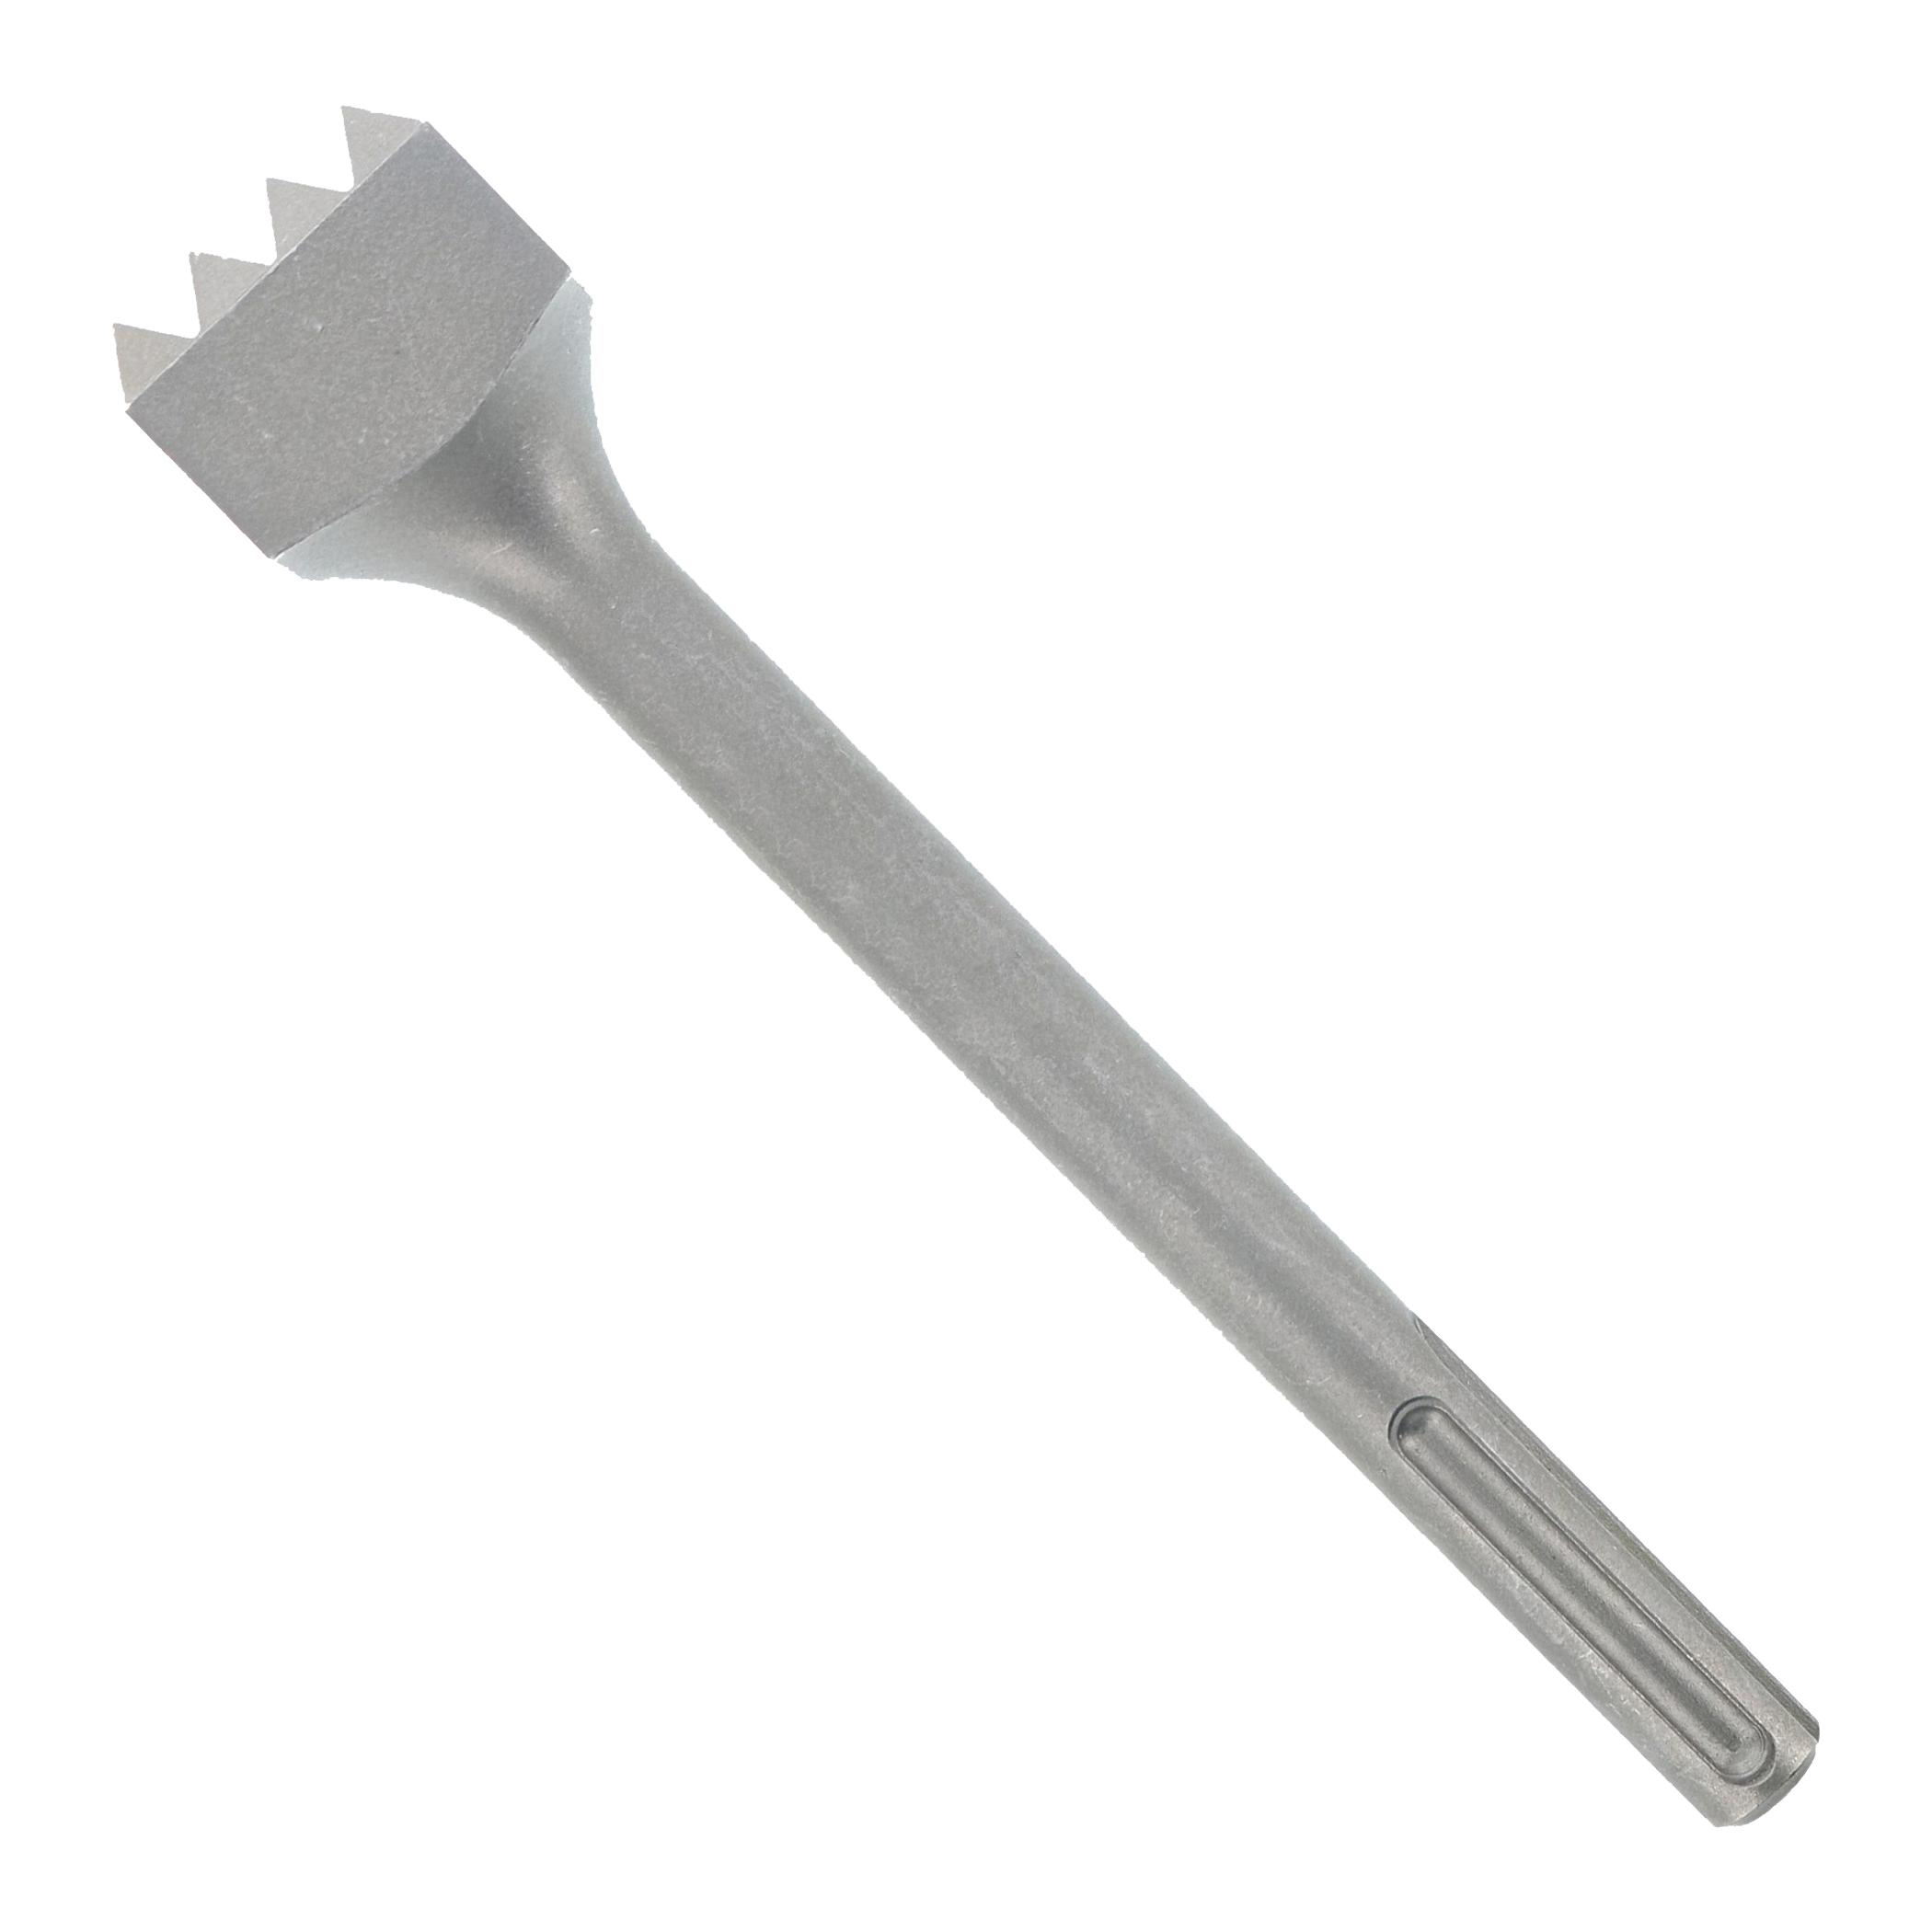 DMAMXCH1050 Bushing Tool, 9-1/4 in OAL, SDS Max Shank